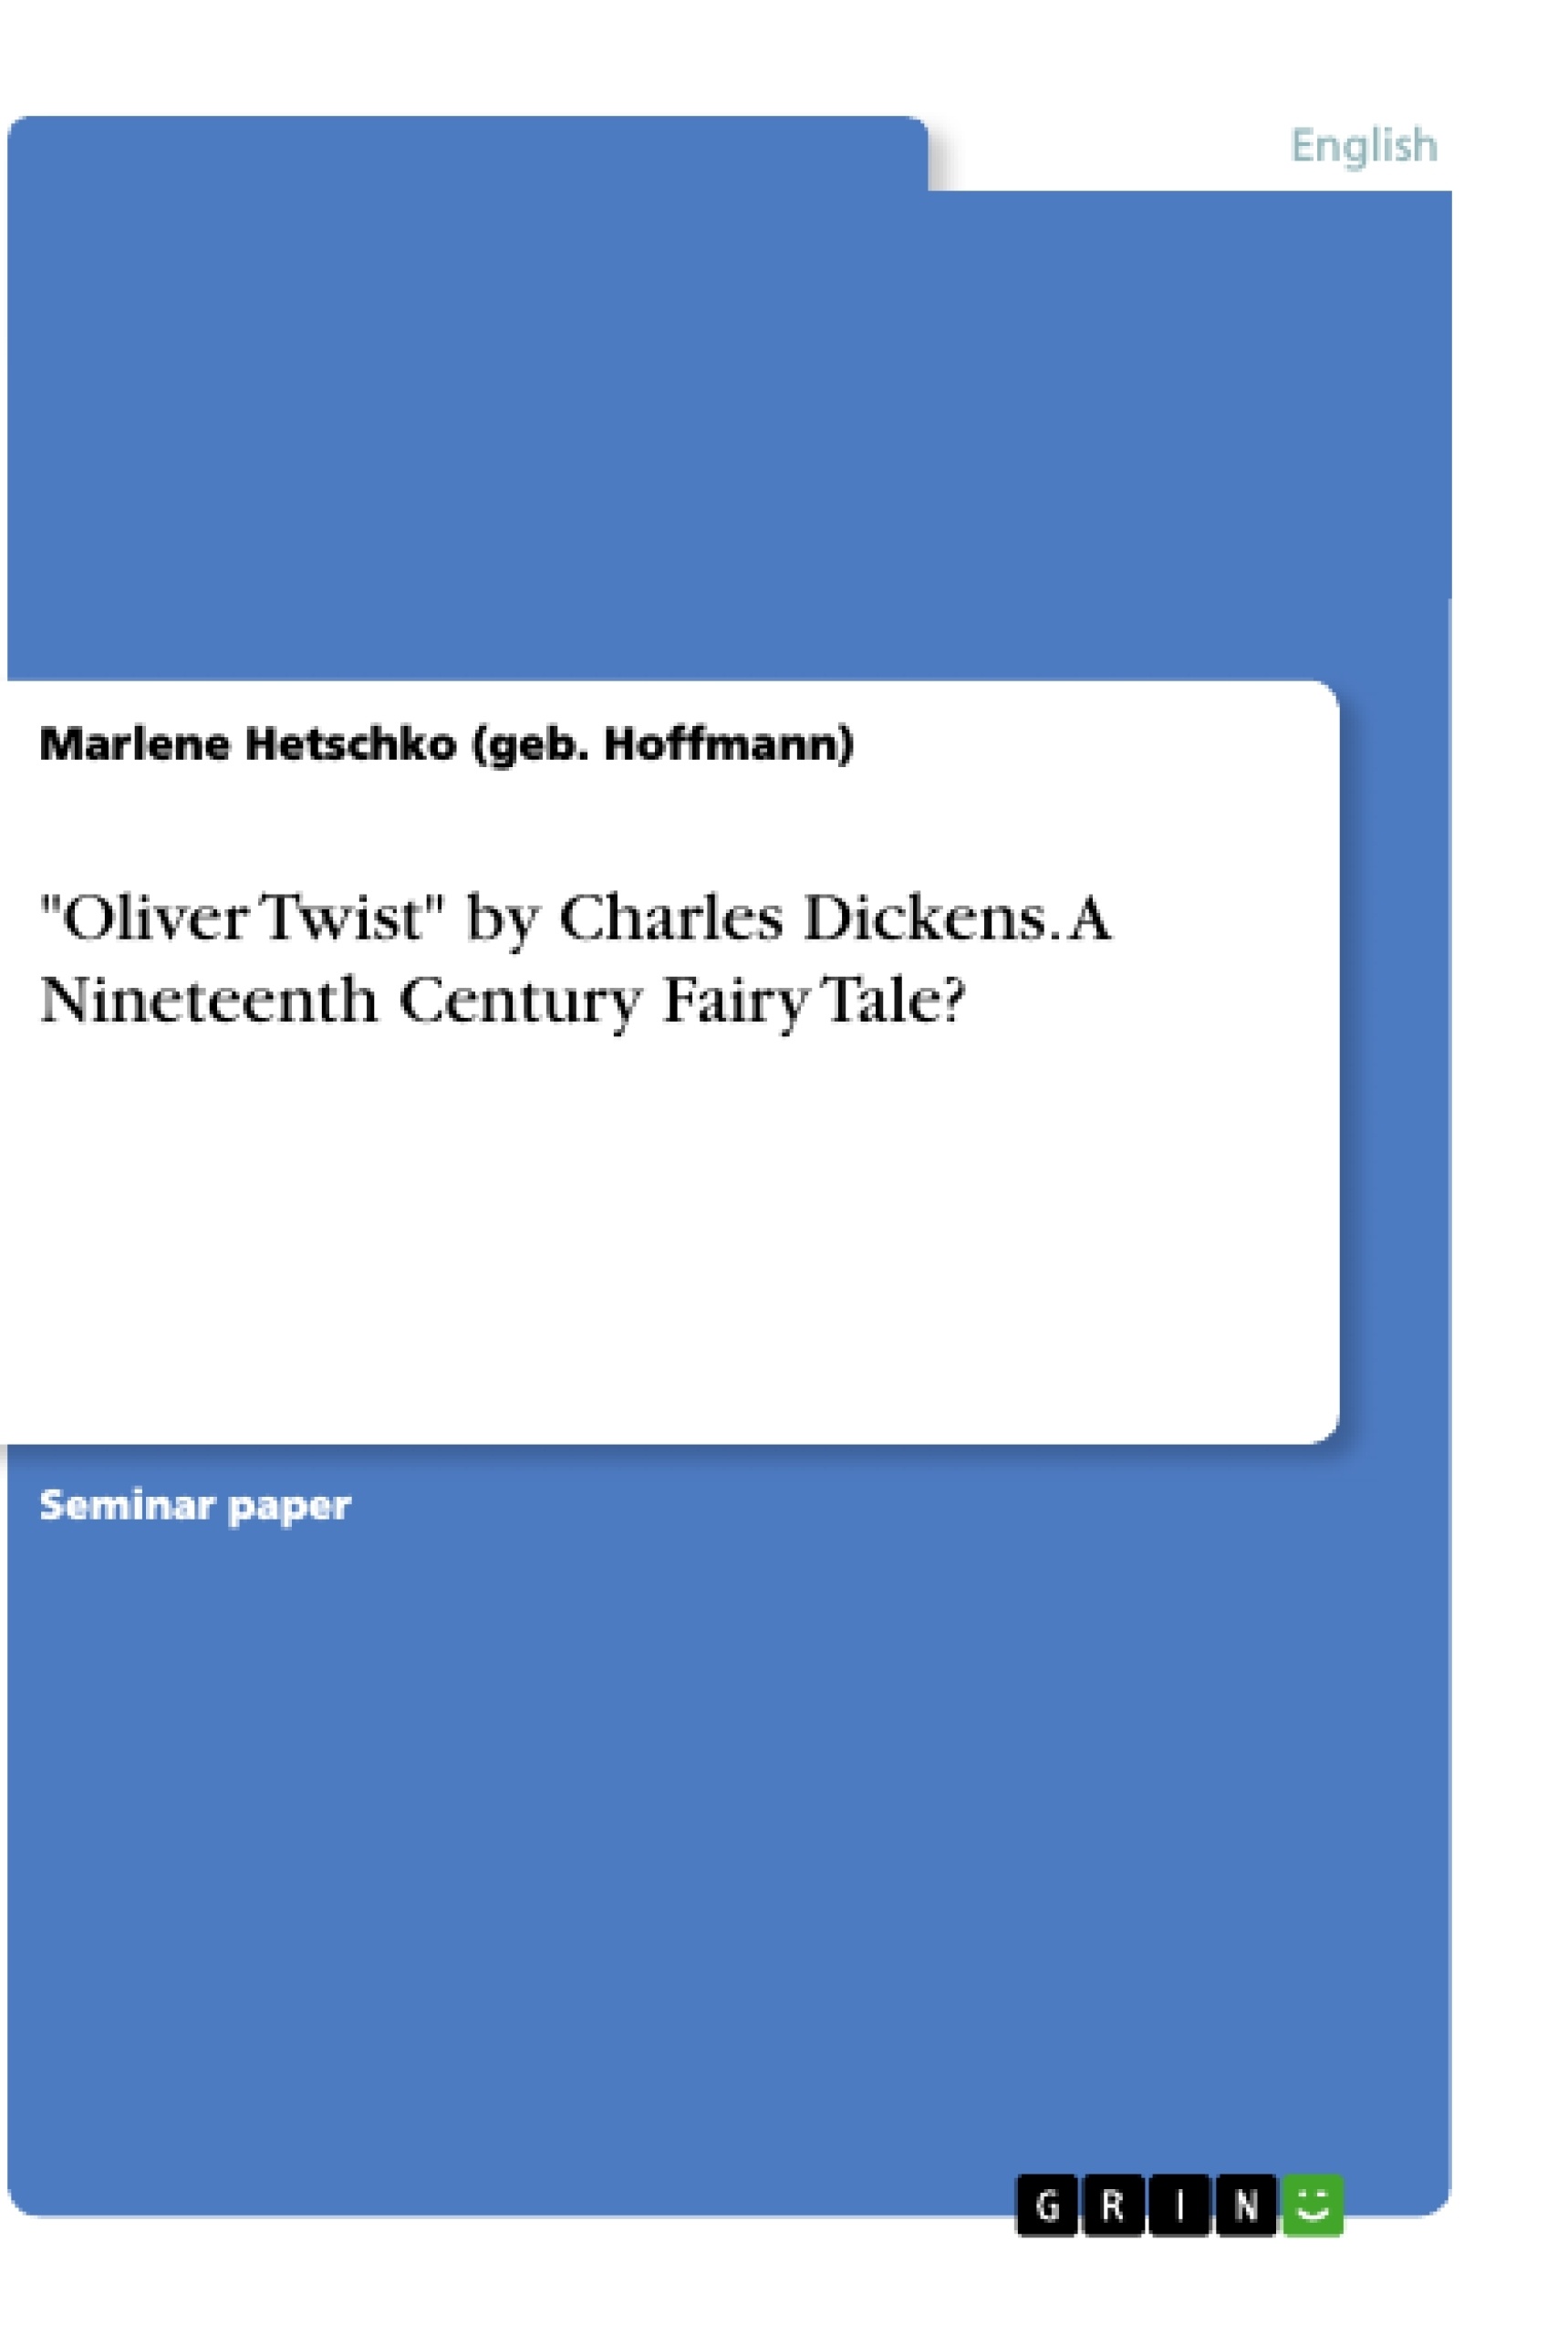 Title: "Oliver Twist" by Charles Dickens. A Nineteenth Century Fairy Tale?